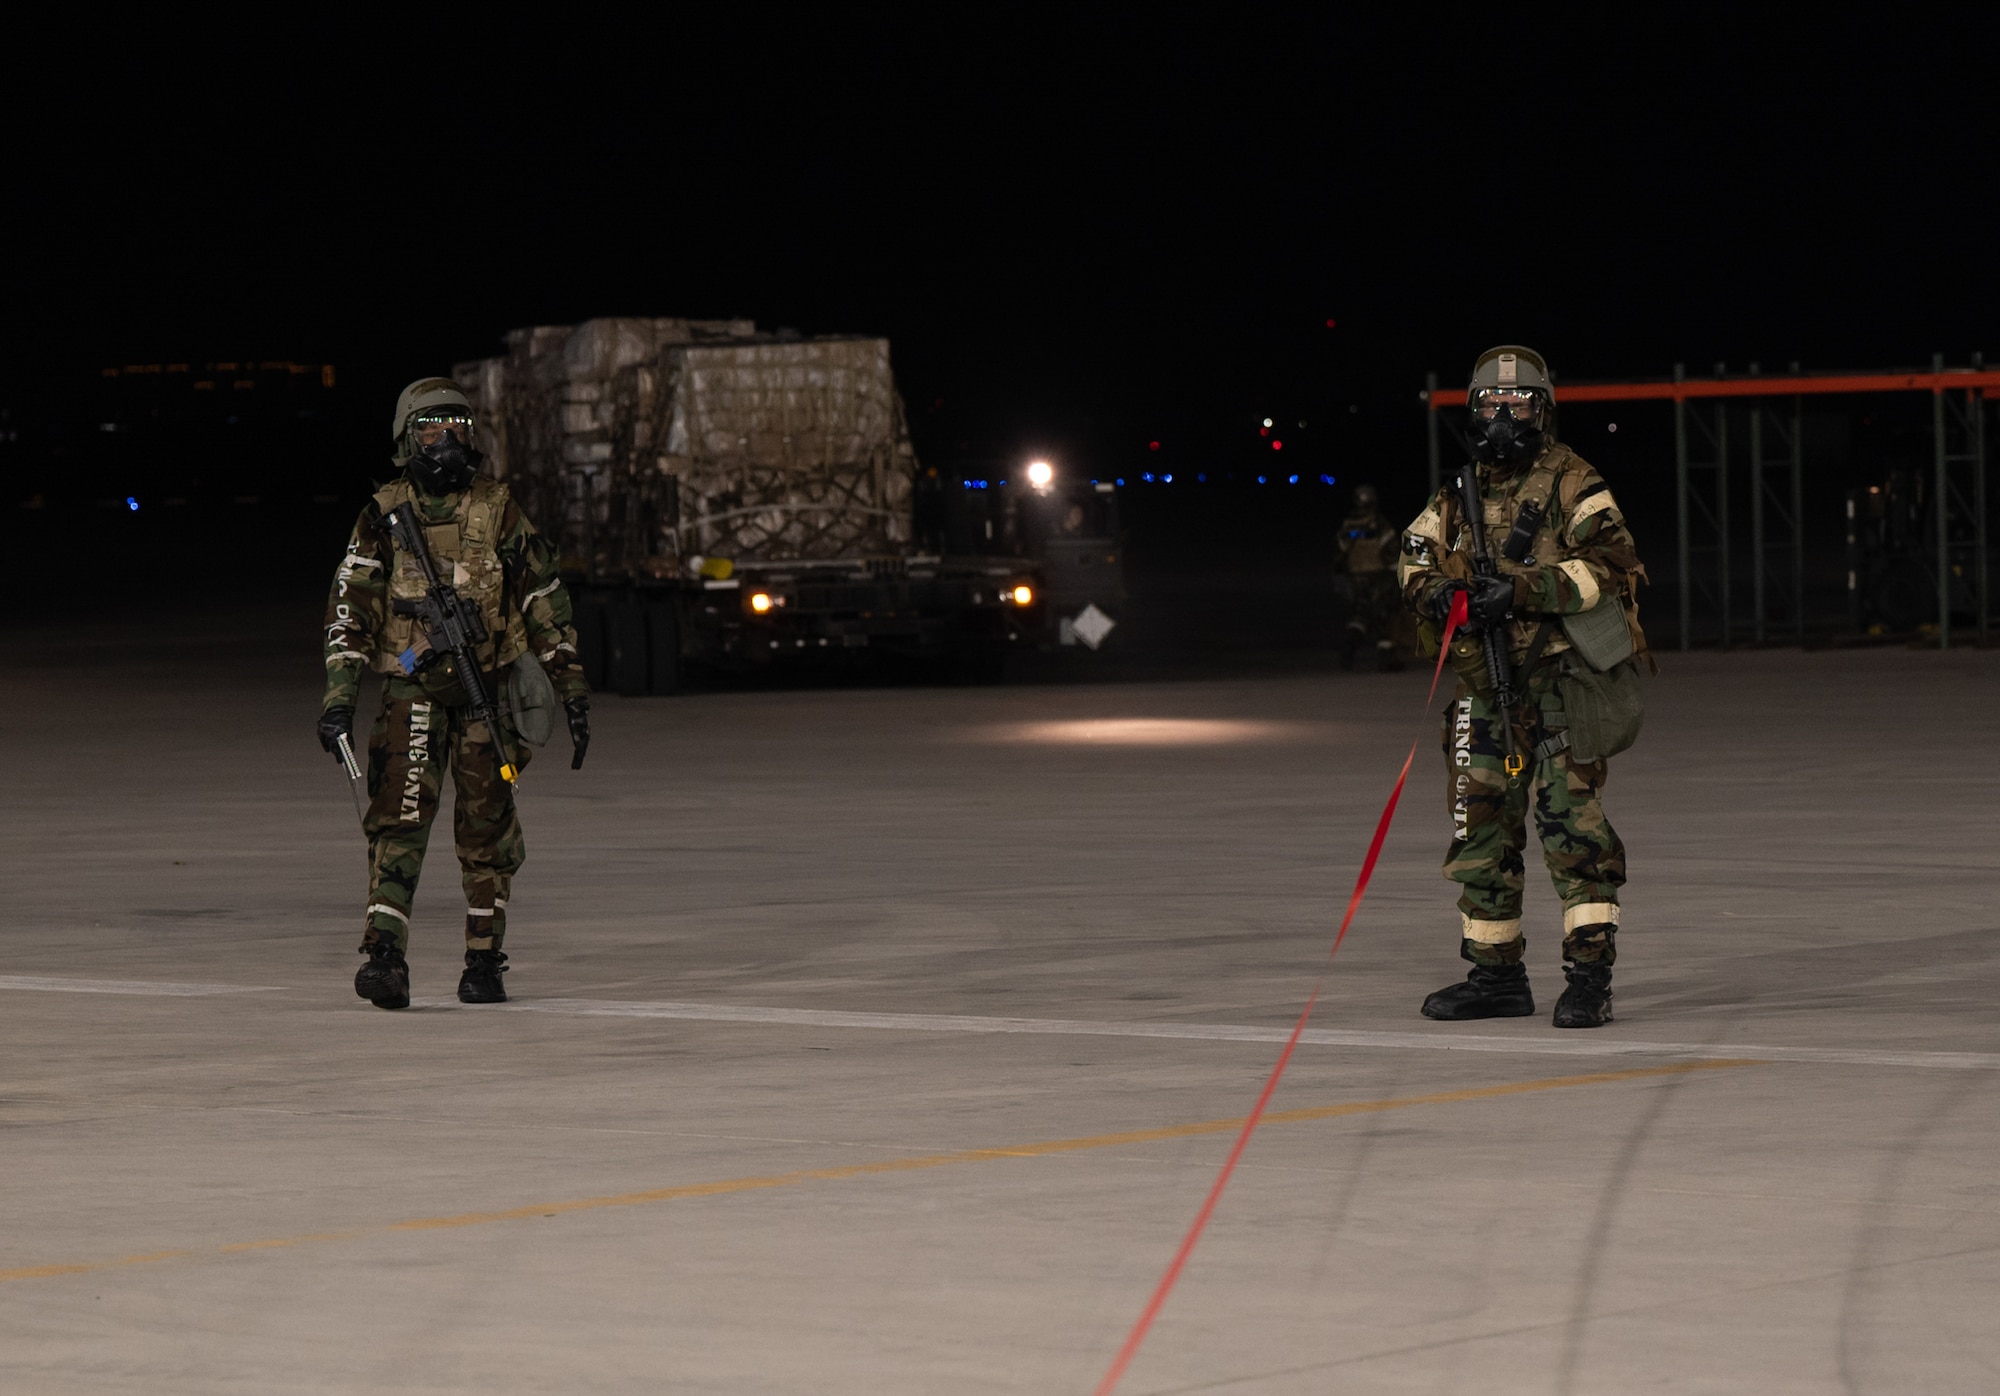 U.S. Air Force Airman 1st Class Candace Yates, left, and Airman Gavyn Hinojosa, 731st Air Mobility Squadron passenger service representatives, cordon off a simulated unexploded ordnance during Beverly Midnight 24-1 at Osan Air Base, Republic of Korea, Jan. 30, 2024. Cordoning a UXO is done to establish a perimeter around the danger area. As the most forward deployed permanently based wing in the Air Force, the 51st Fighter Wing is charged with providing mission-ready Airmen to execute combat operations and receive follow-on forces. BM24-1 is a routine training event that tests the military capabilities across the peninsula, allowing combined and joint training at both the operational and tactical levels. (U.S. Air Force photo by Senior Airman Brittany Russell)